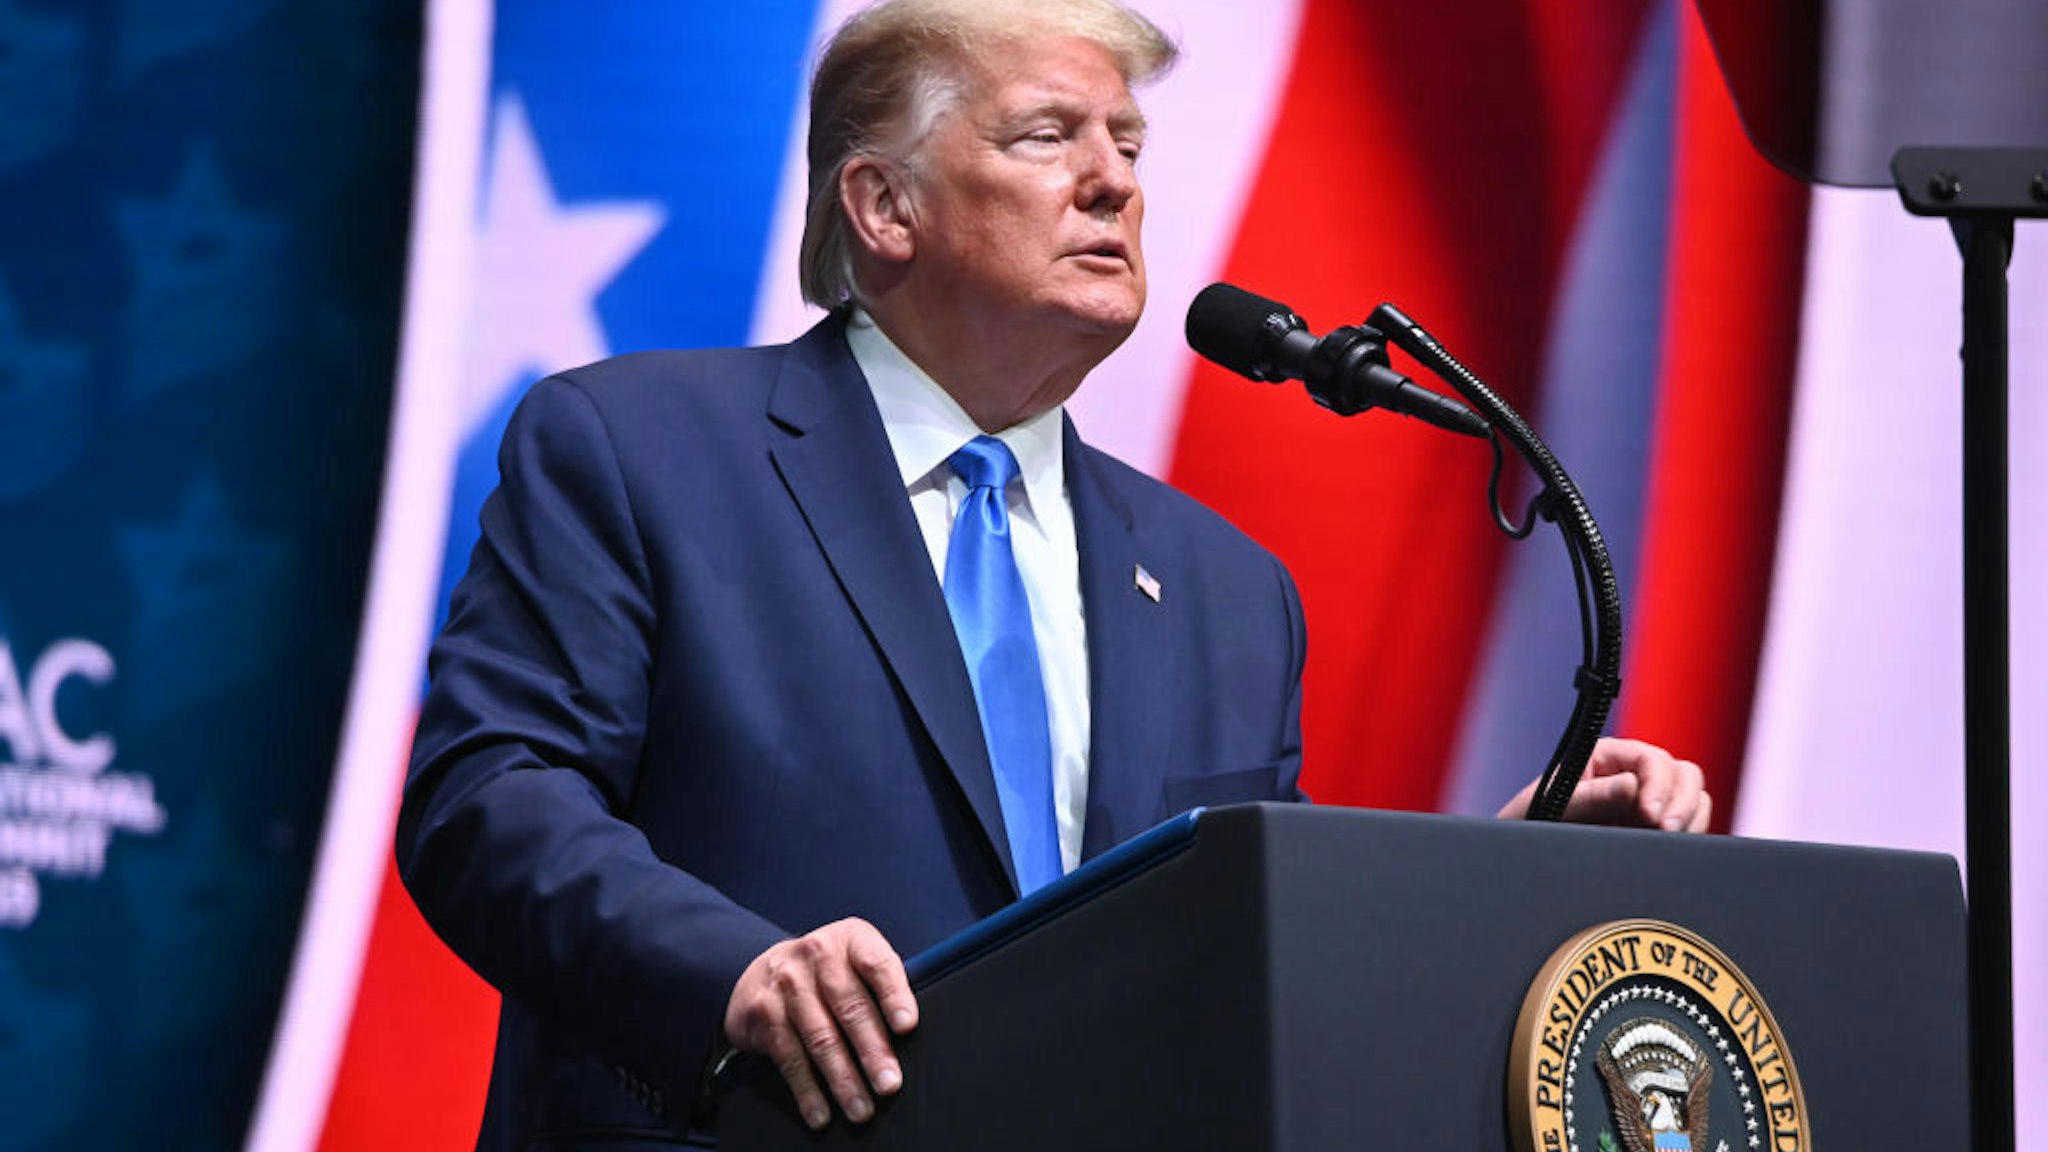 President Donald Trump speaks at the Israeli American Council National Summit on December 07, 2019 in Hollywood, Florida.